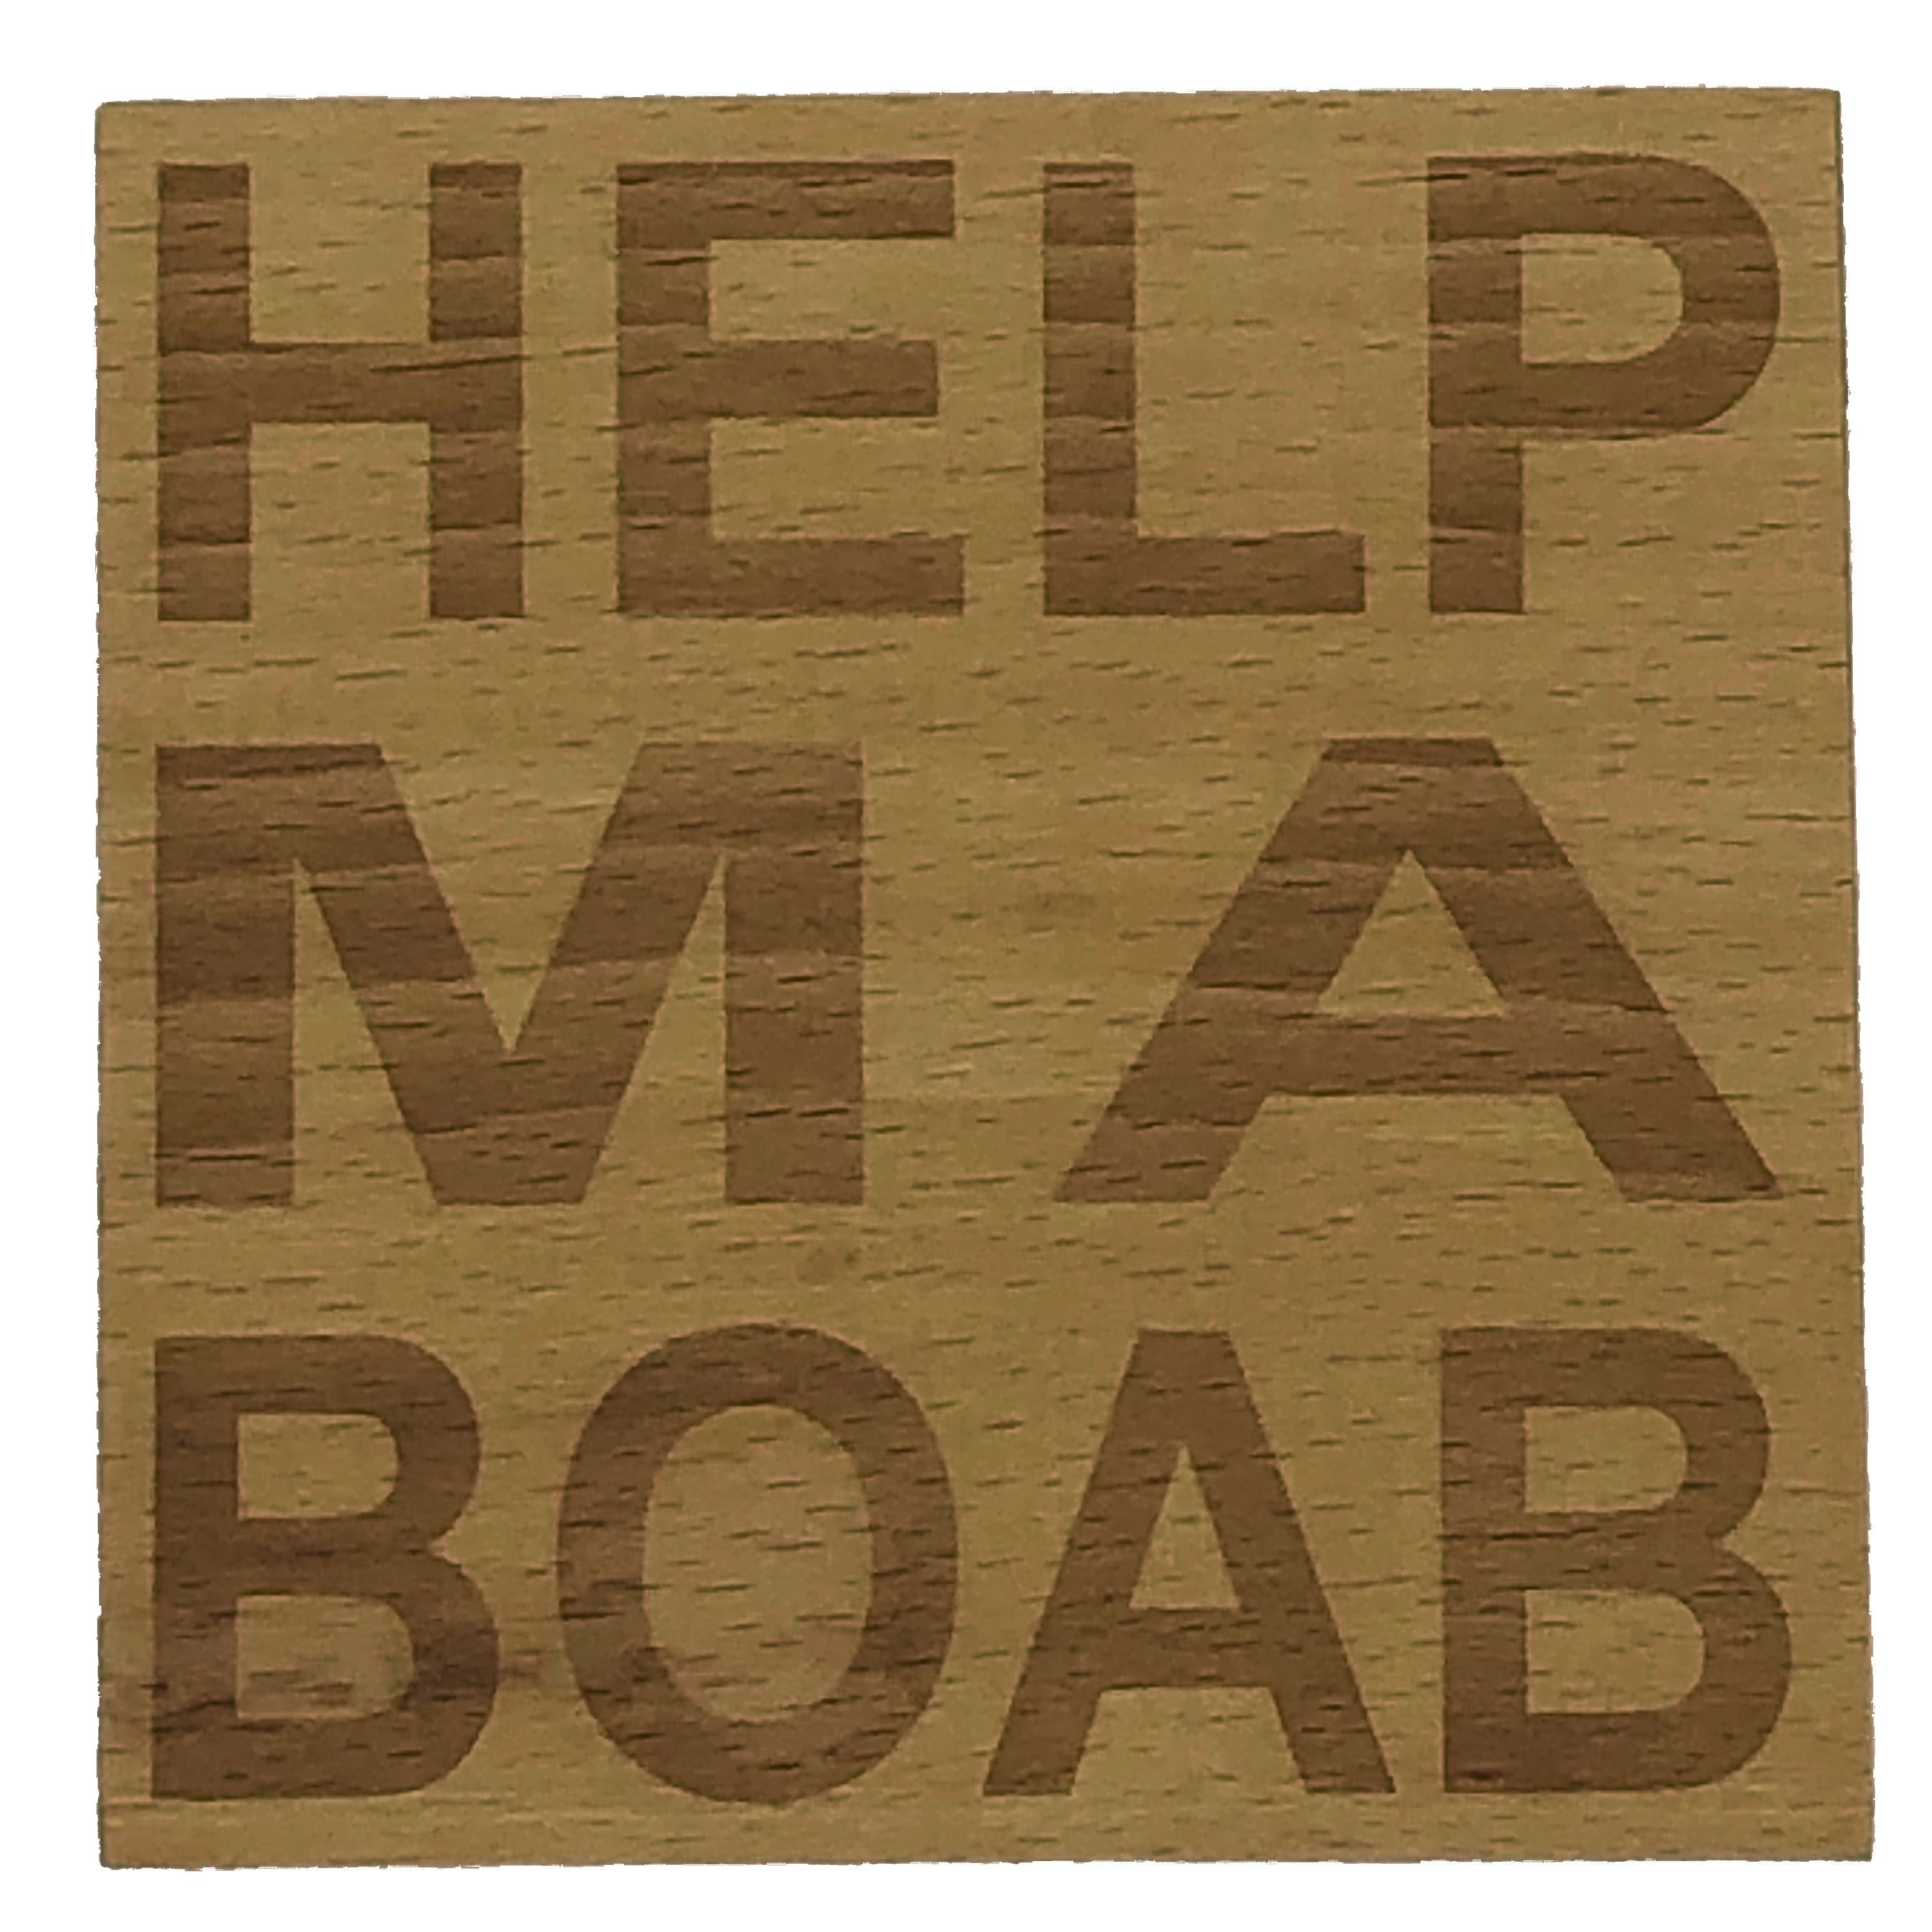 Wooden coaster gift - Scottish dialect - help ma boab